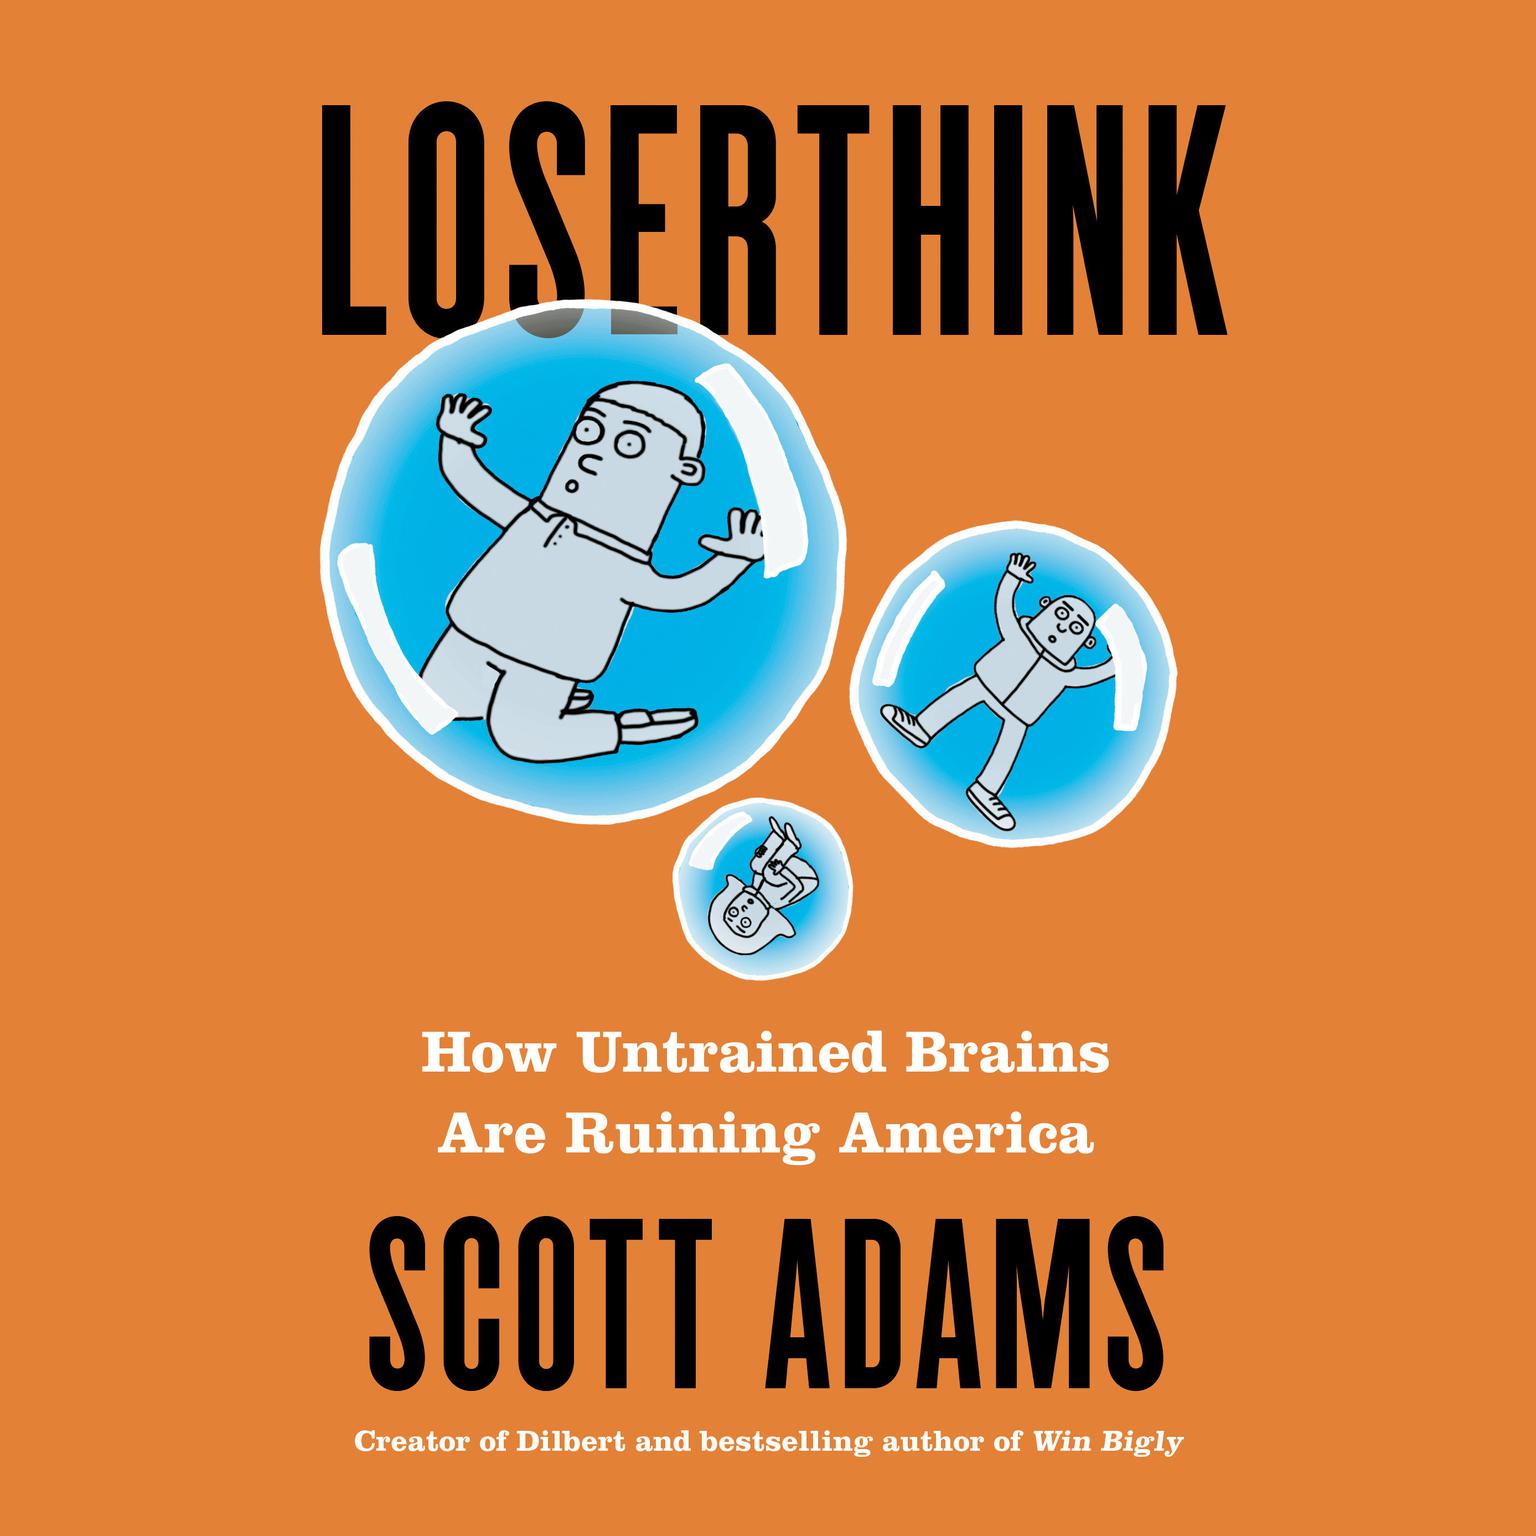 Loserthink: How Untrained Brains Are Ruining America Audiobook, by Scott Adams